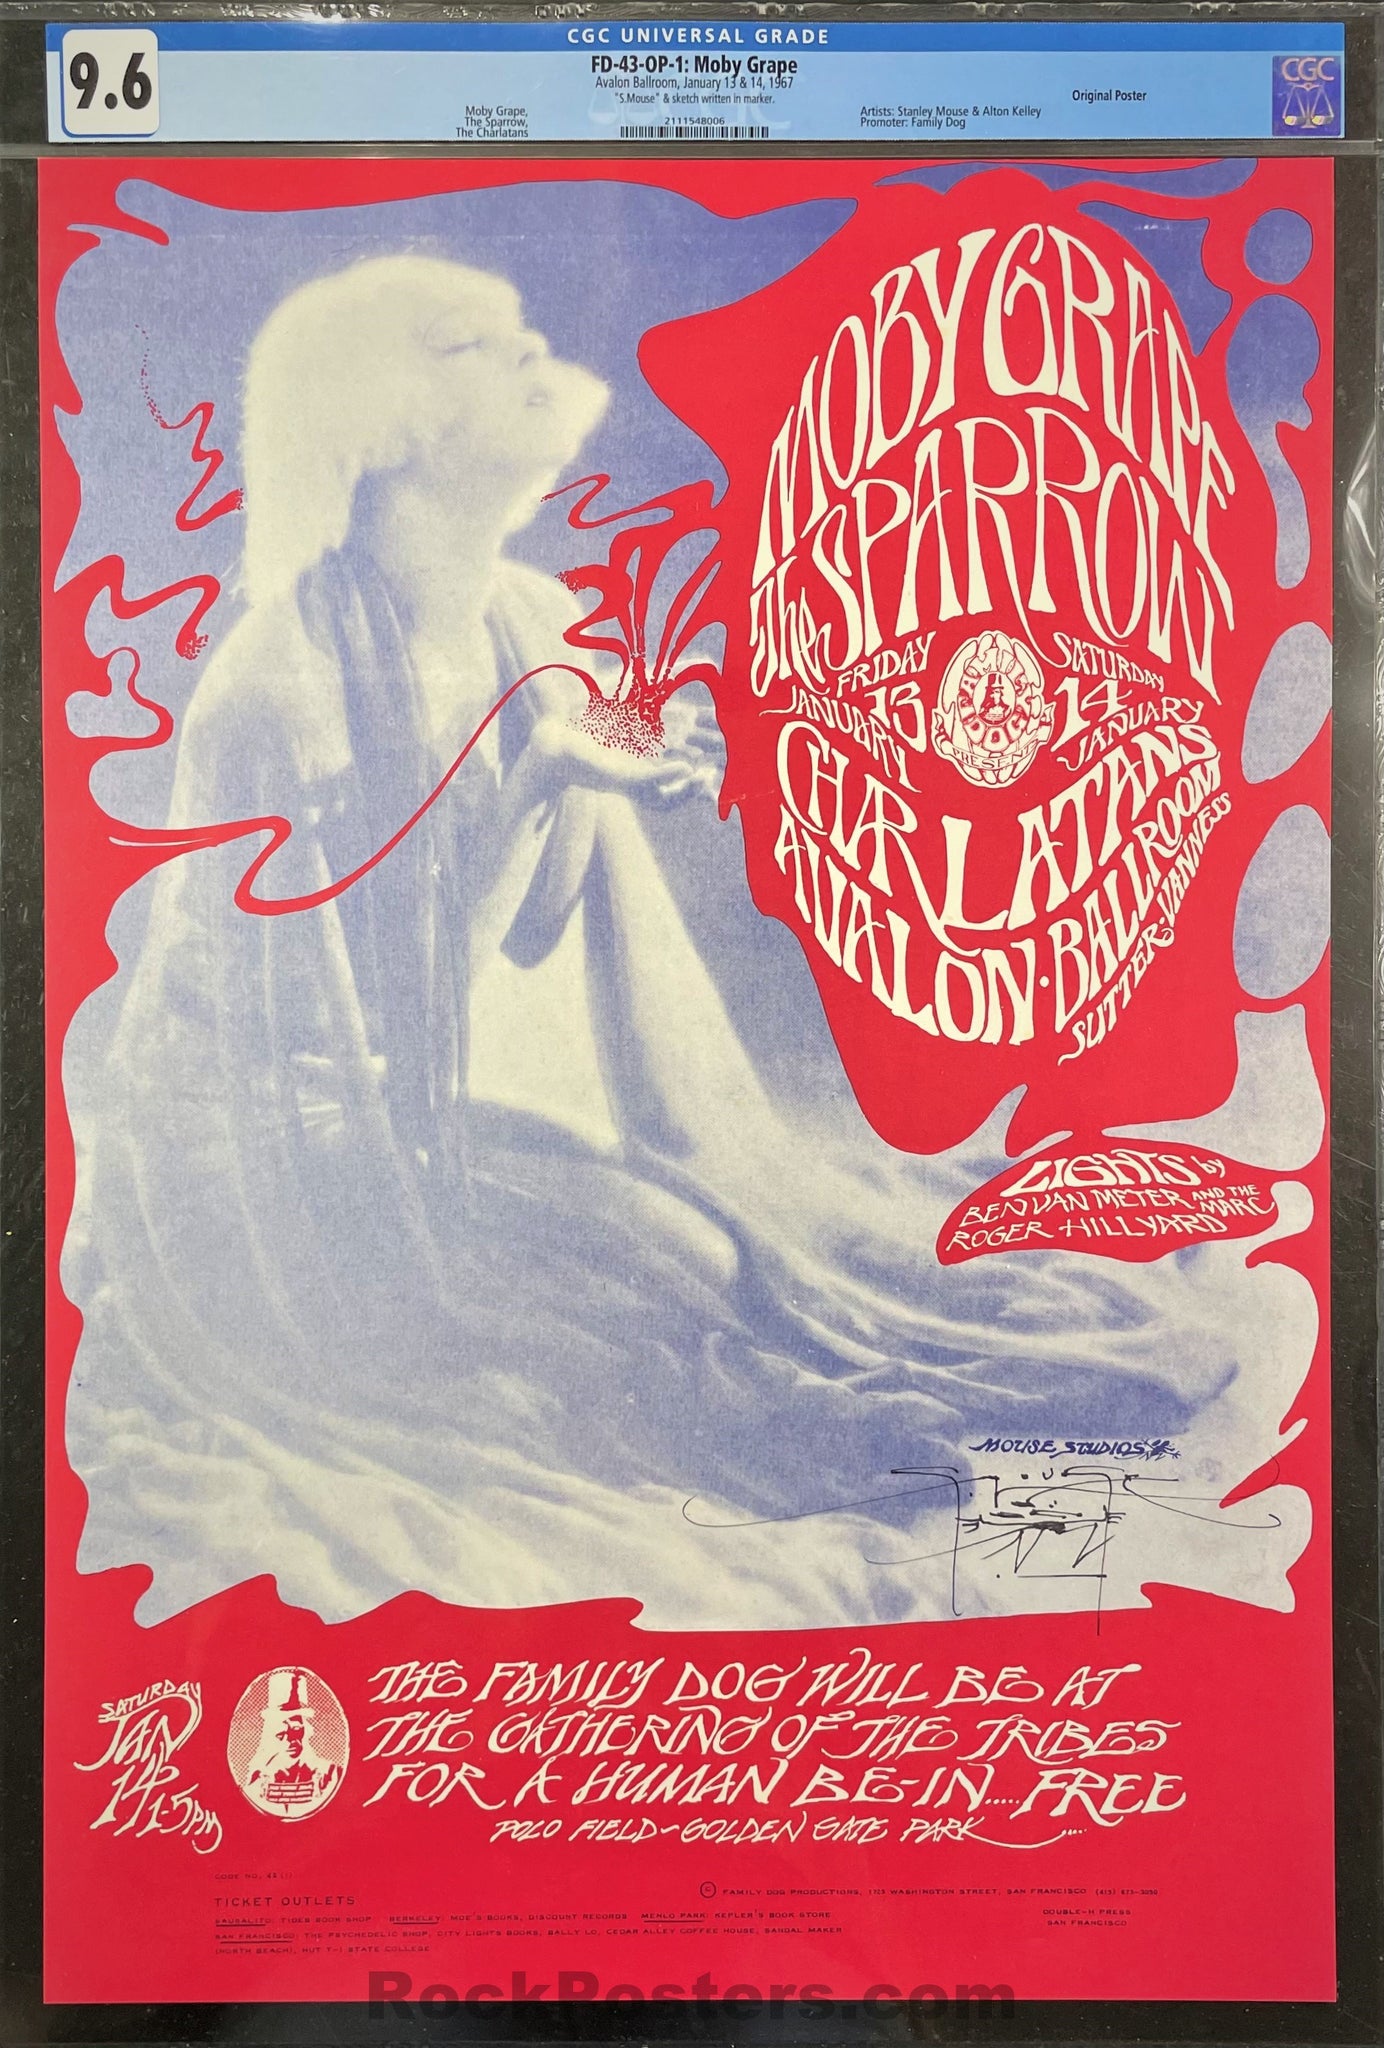 AUCTION - FD-43 - Moby Grape - Mouse SIGNED - 1966 Poster - Avalon Ballroom - CGC Graded 9.6